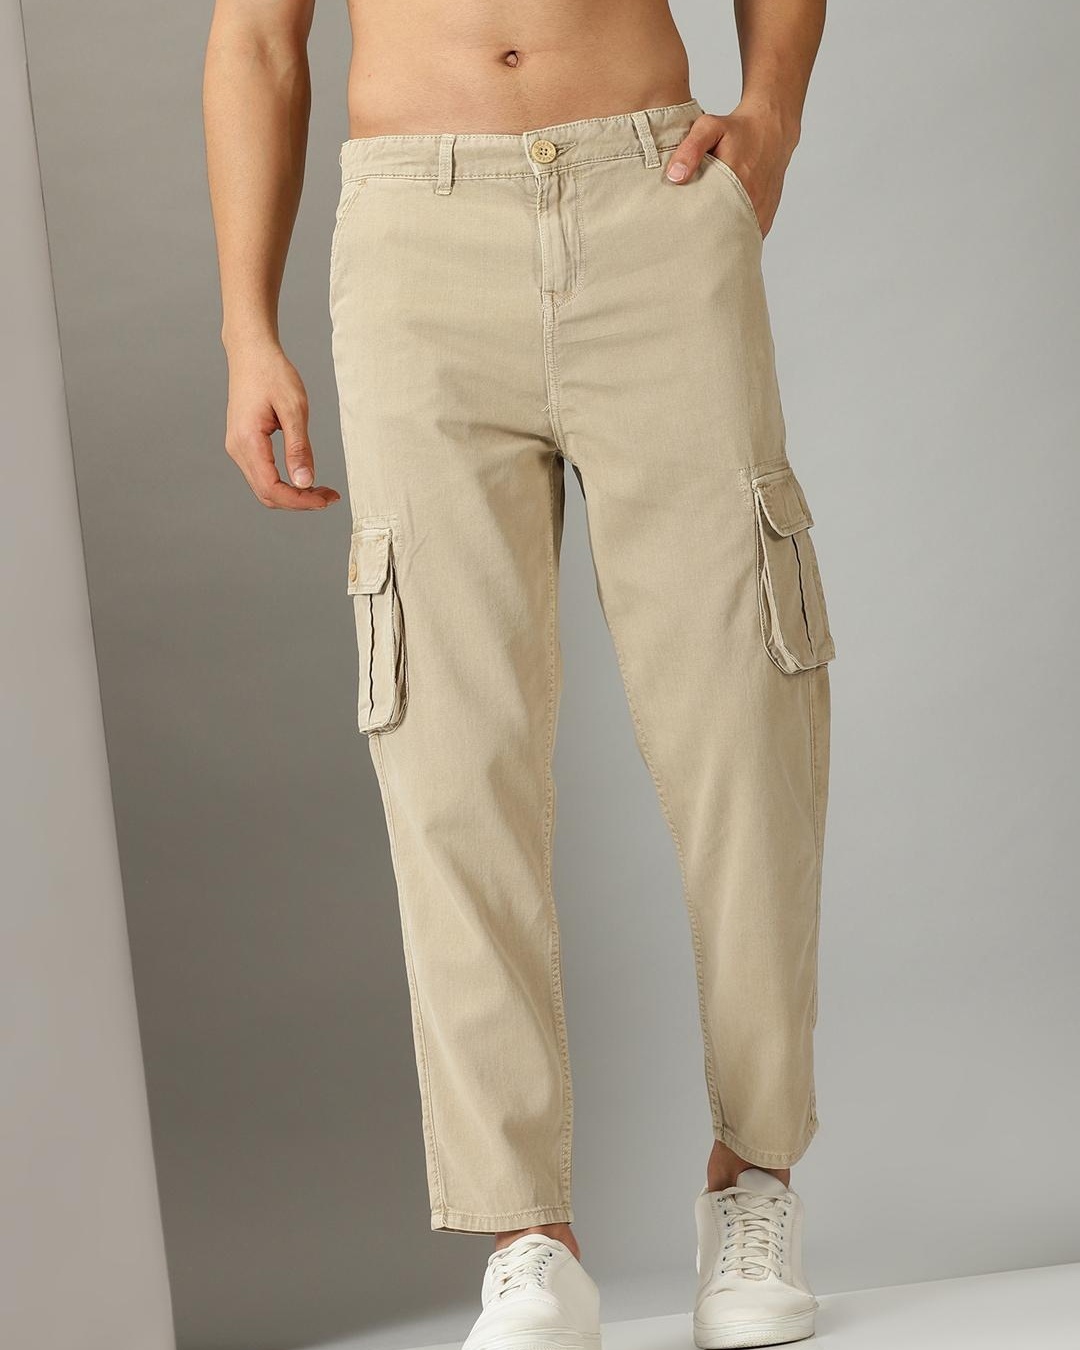 The Souled Store Beige Relaxed Fit Cargo Pants